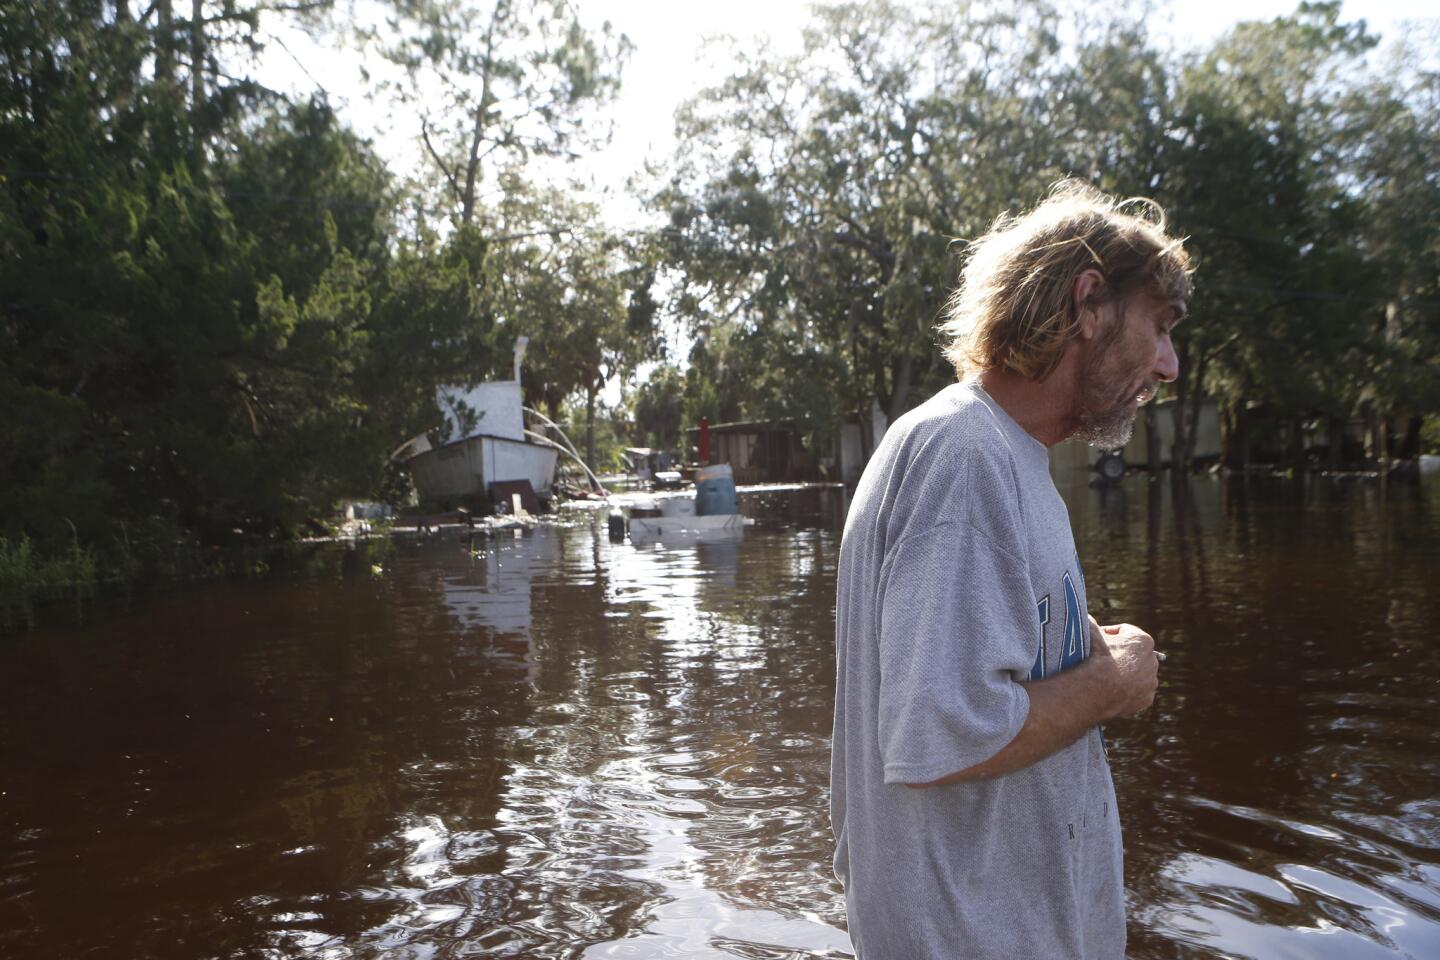 A resident surveys damage around his home from high winds and storm surge associated with Hurricane Hermine which made landfall overnight in Tampa, Florida.